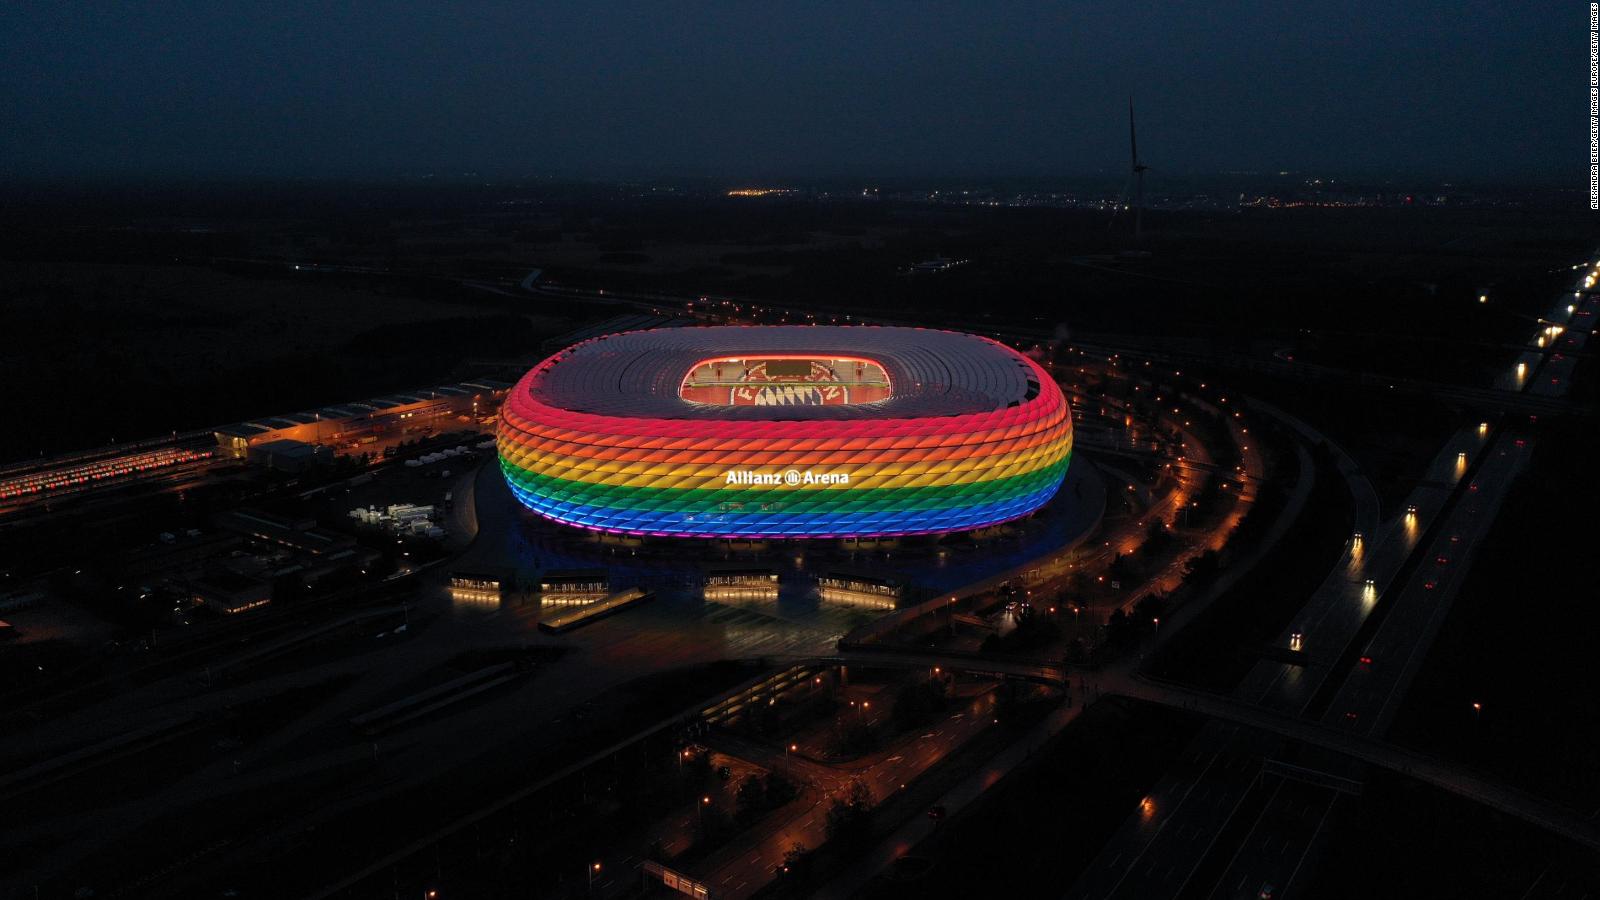 UEFA rejects request to light up Allianz Arena in rainbow colors for